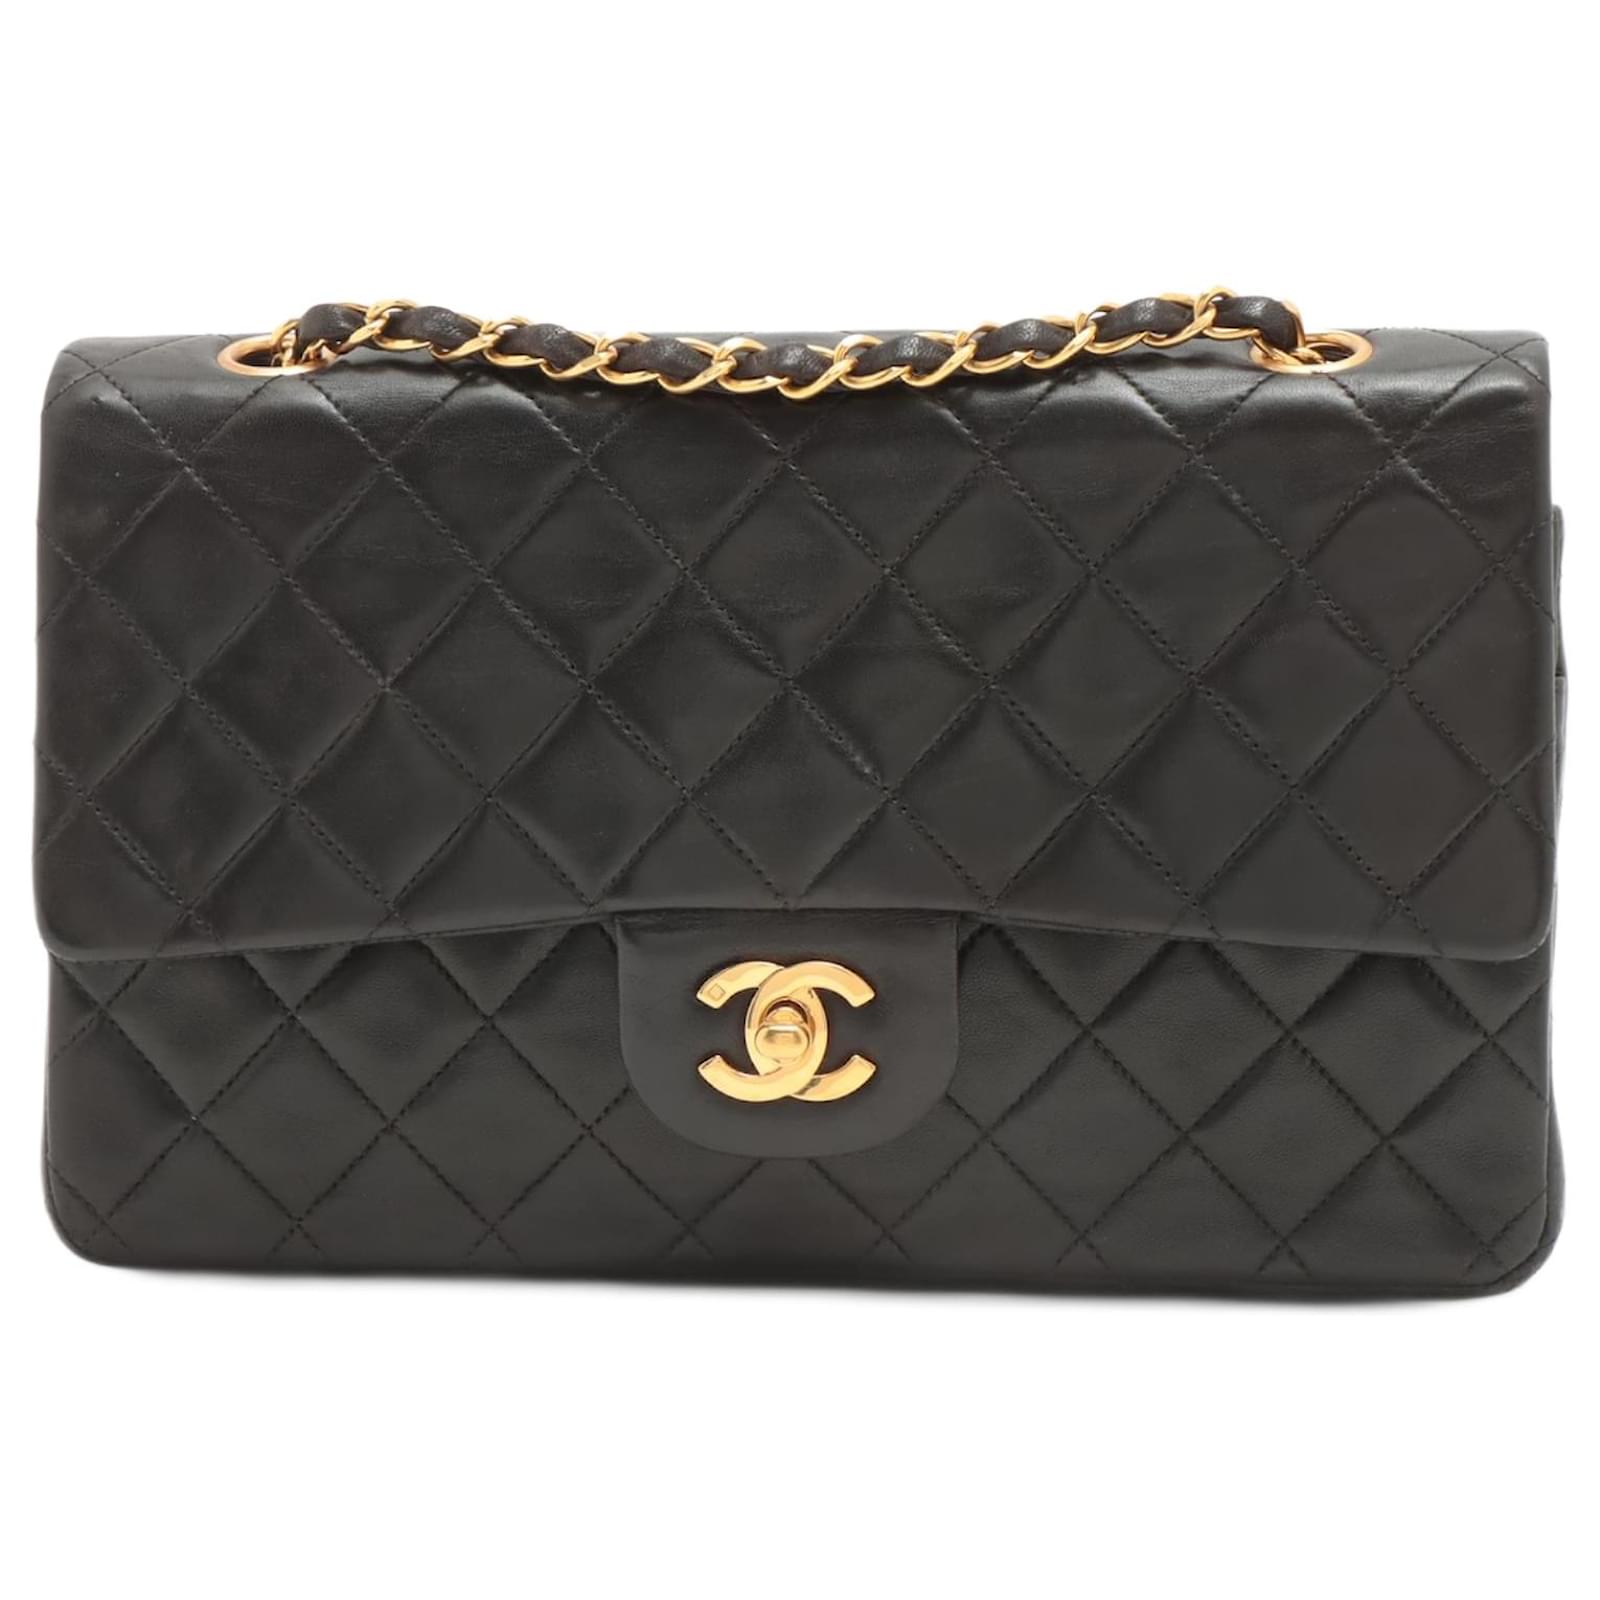 Chanel matelasse parent and child bag hand leather black gold metal fi